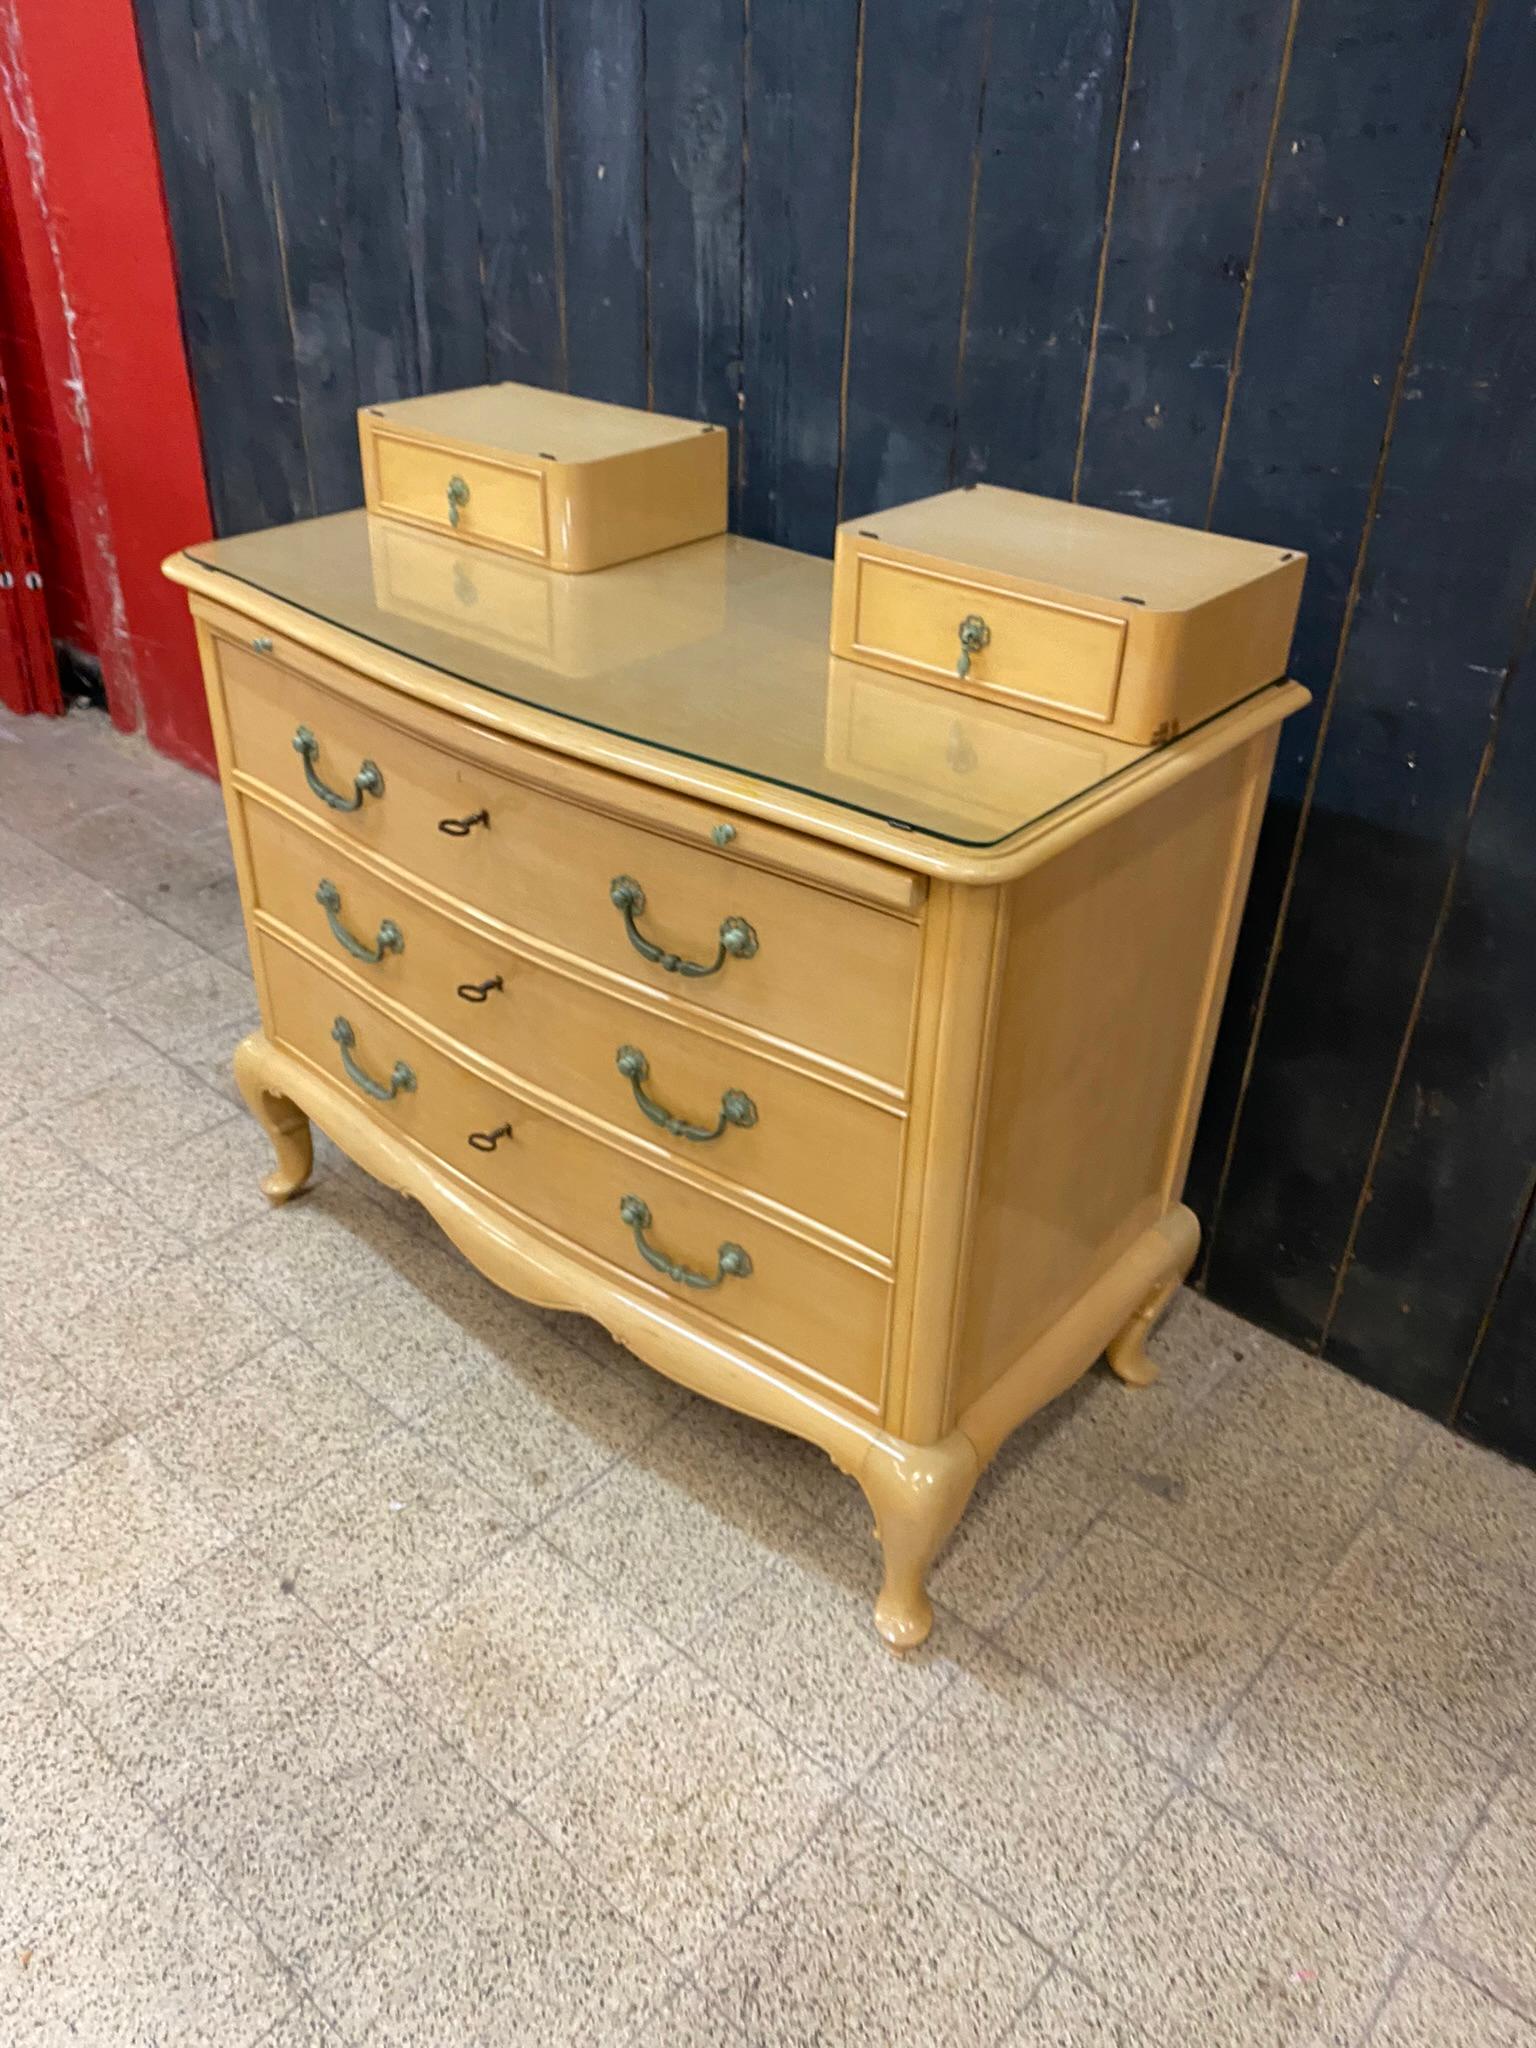 Neo-Classical Chest of Drawers in Sycamore and Patinated Bronze, circa 1940/1950 For Sale 4